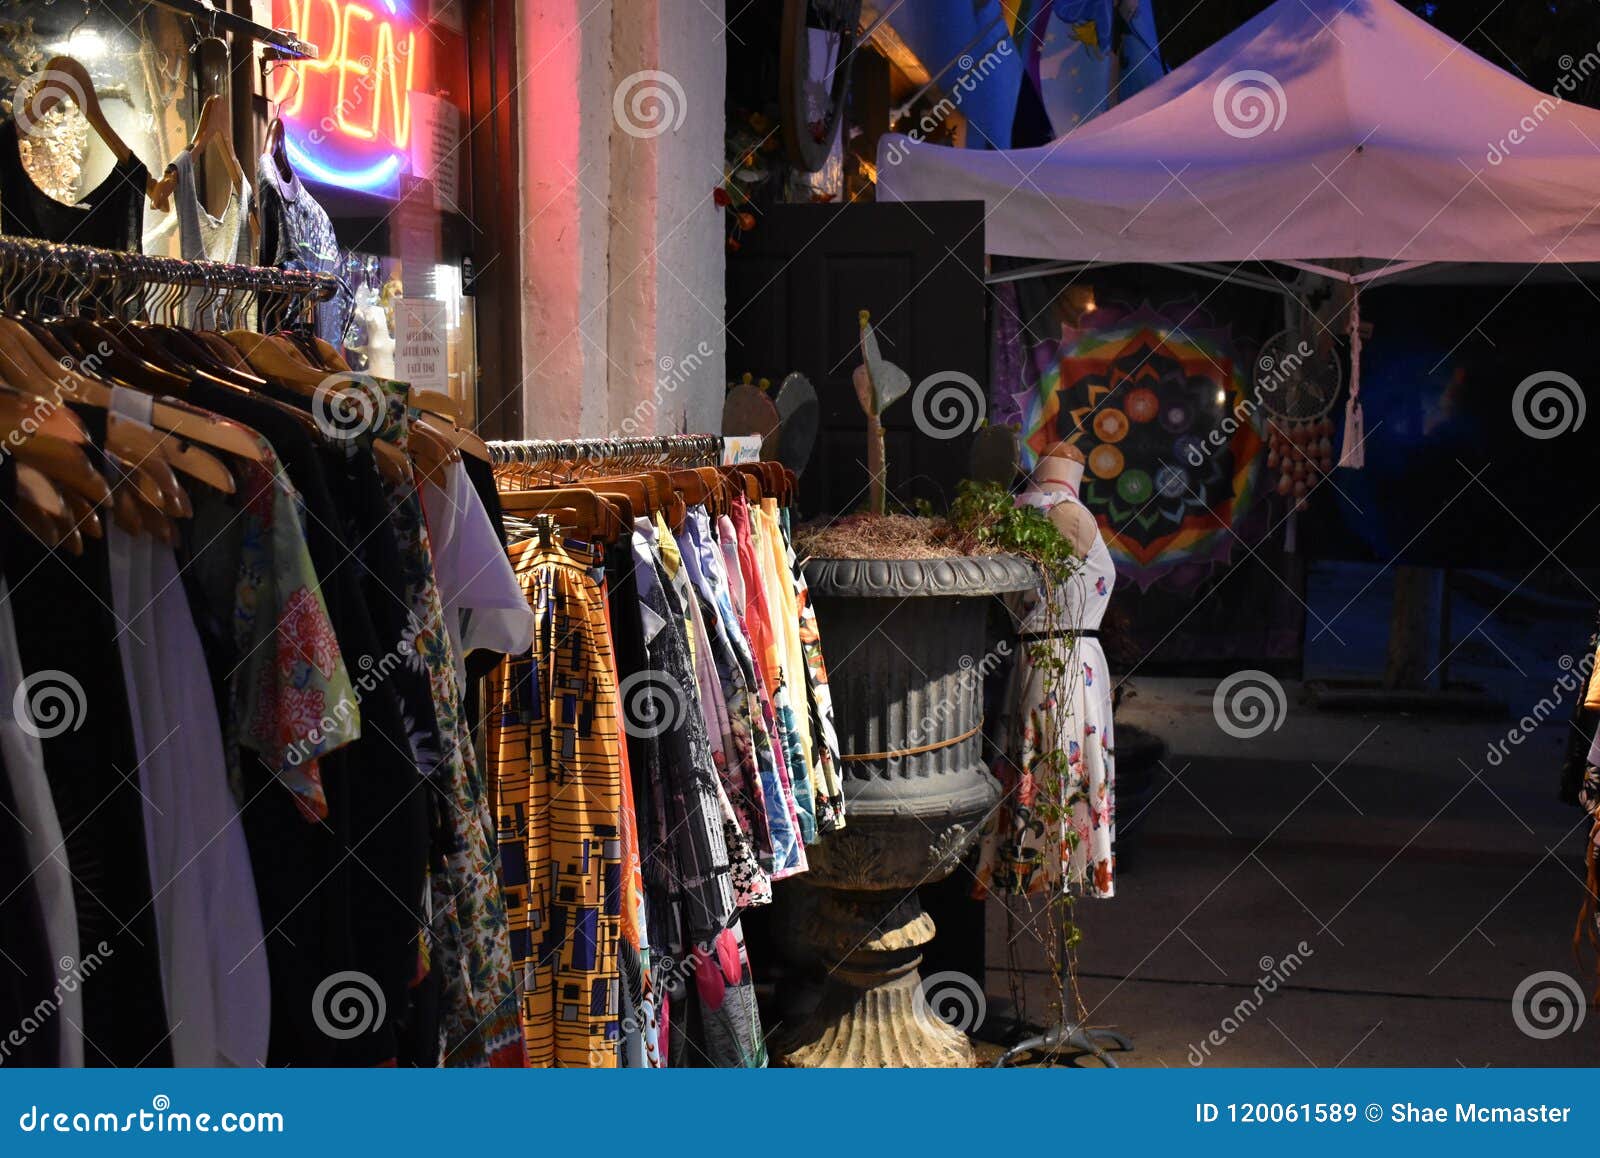 Clothing Hangs Outside of a Trendy Store Editorial Stock Image - Image ...